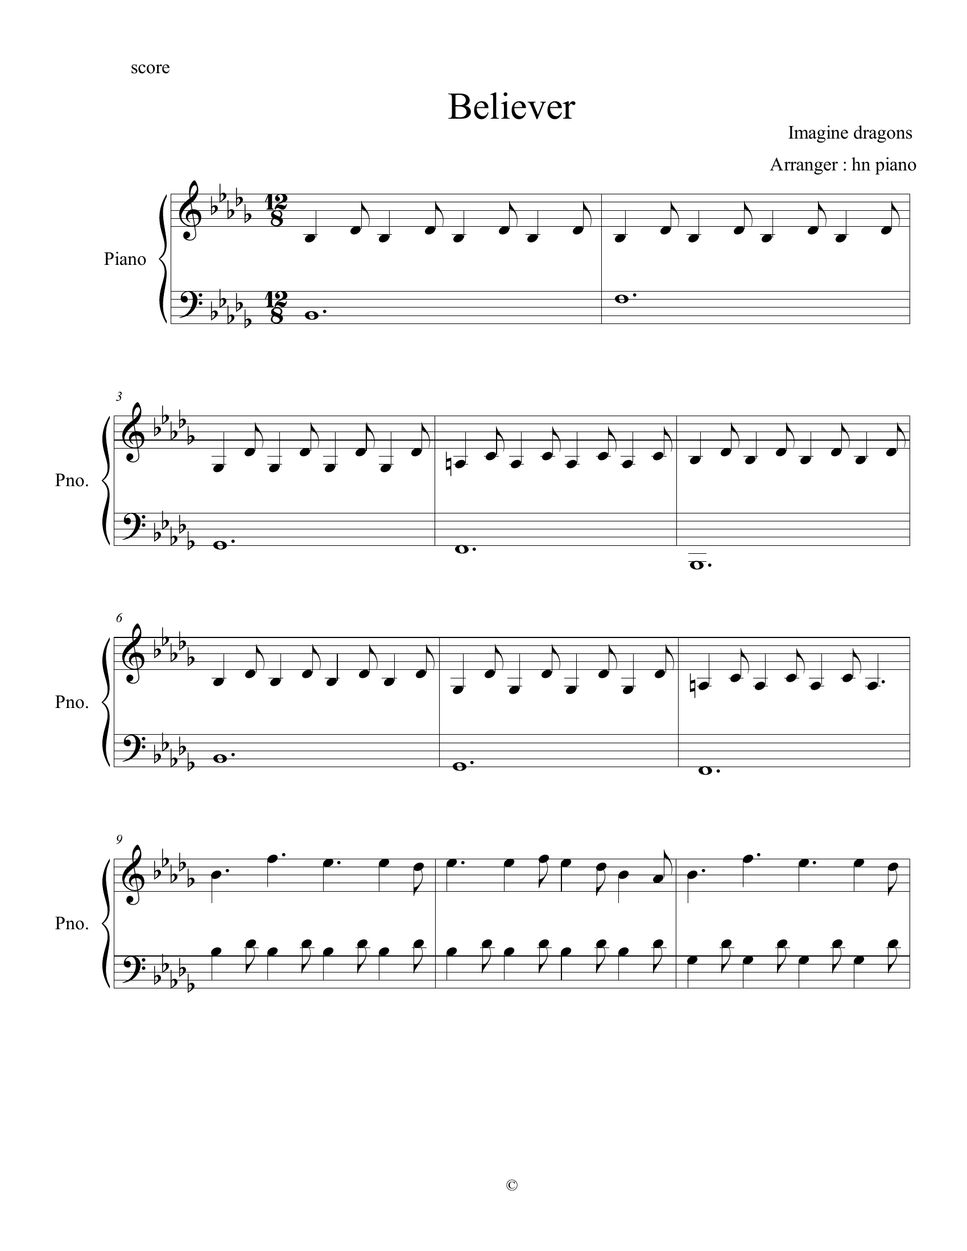 Imagine Dragons - Believer Sheets by hn piano